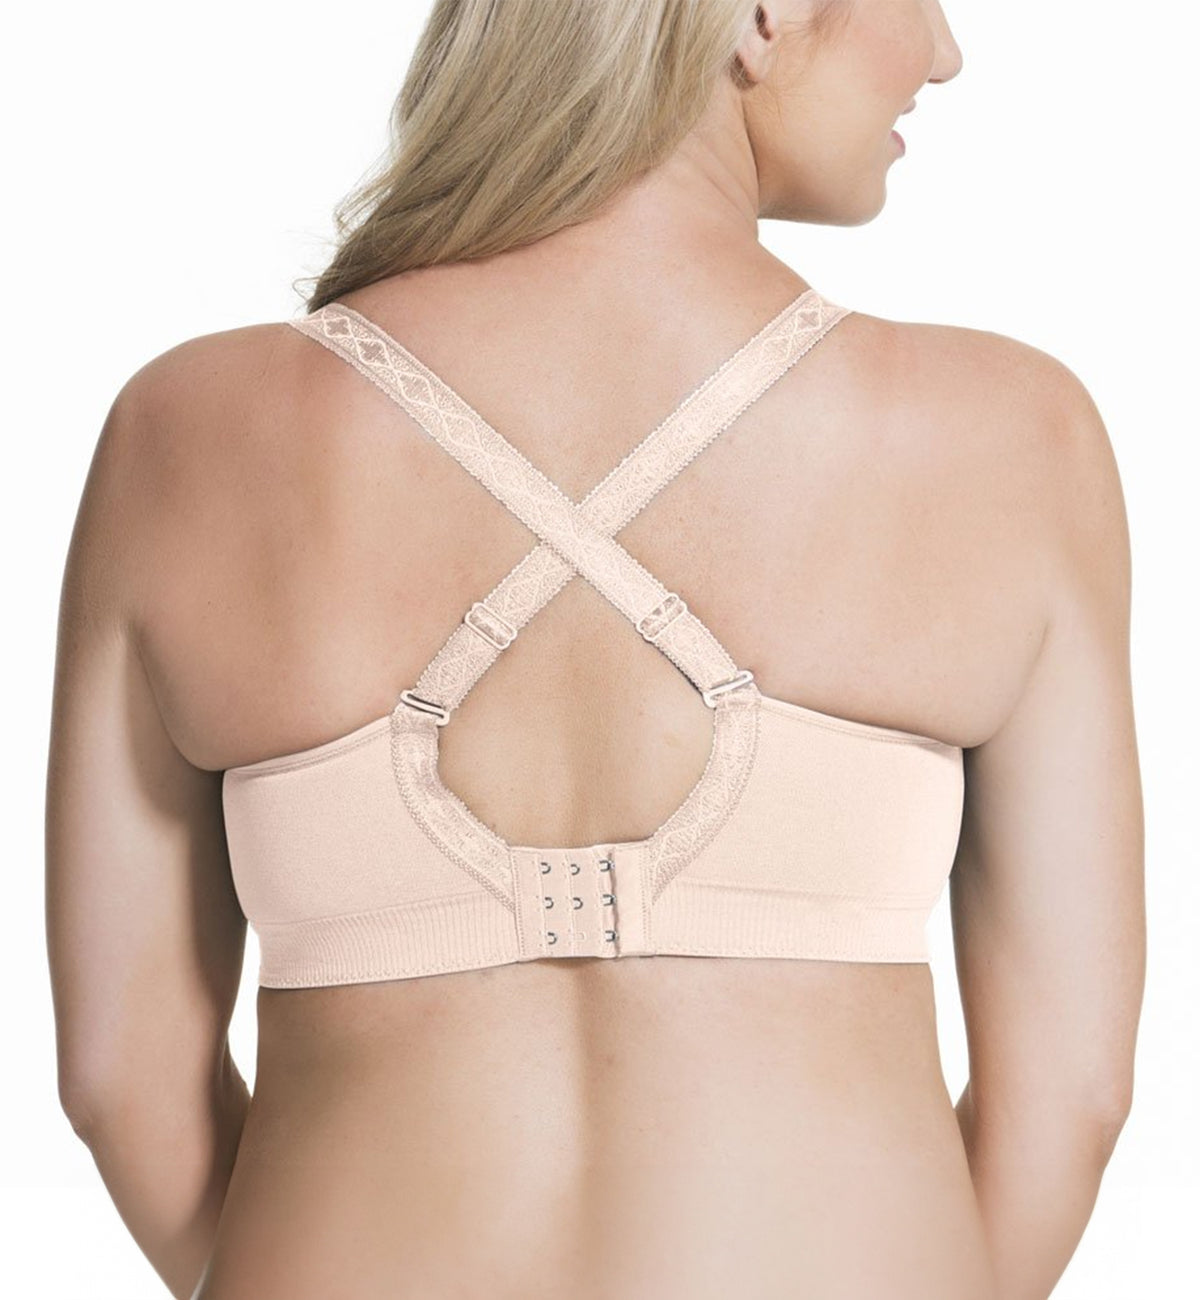 Sugar Candy by Cake Seamless Basic Everyday Softcup Bra (28-8005),XS,Nude - Nude,XS